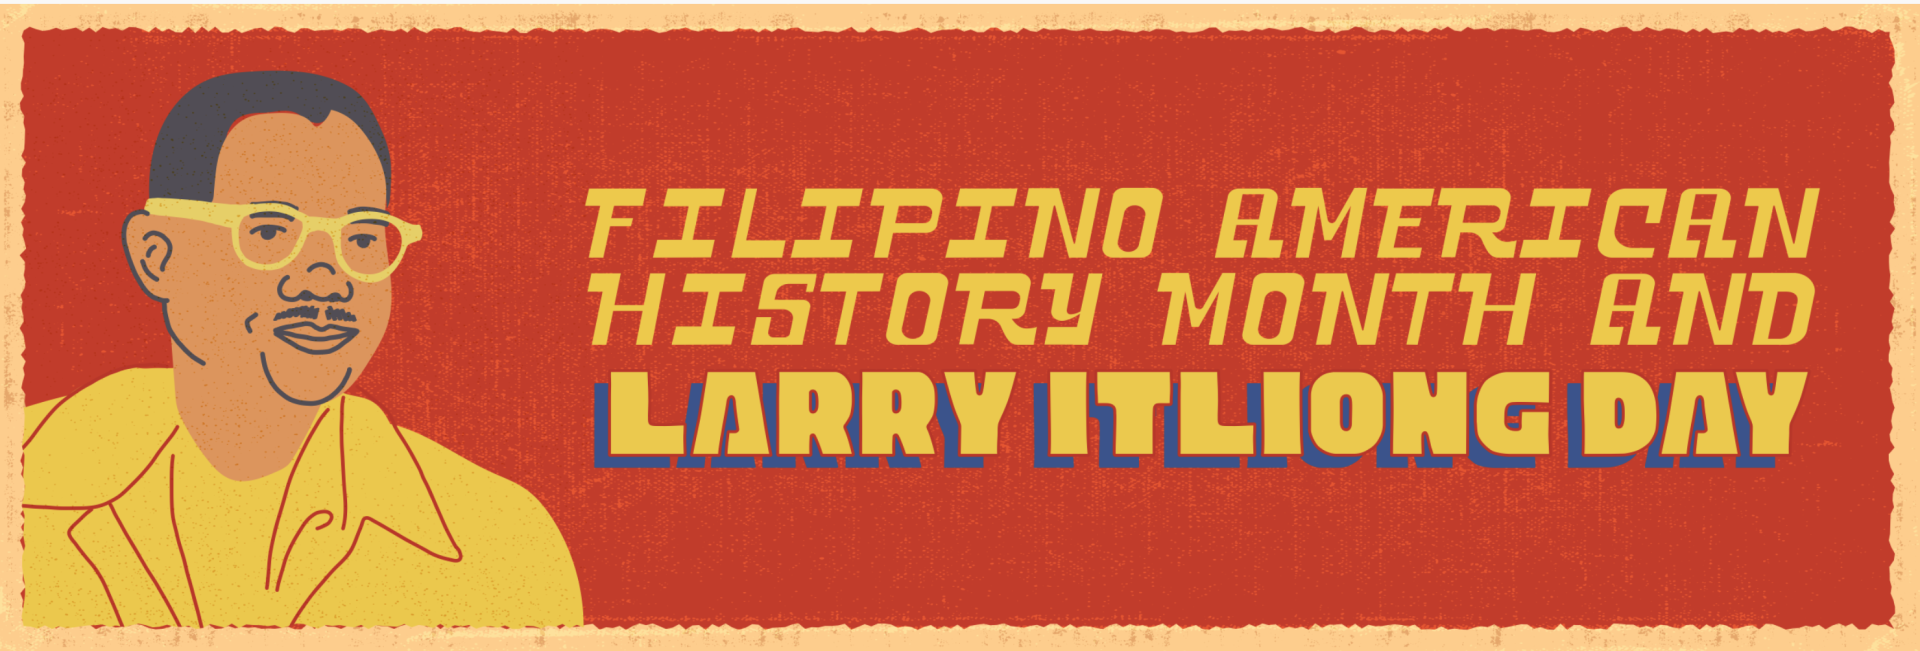 Filipino AMerican HIstory Month and Larry Itliong day